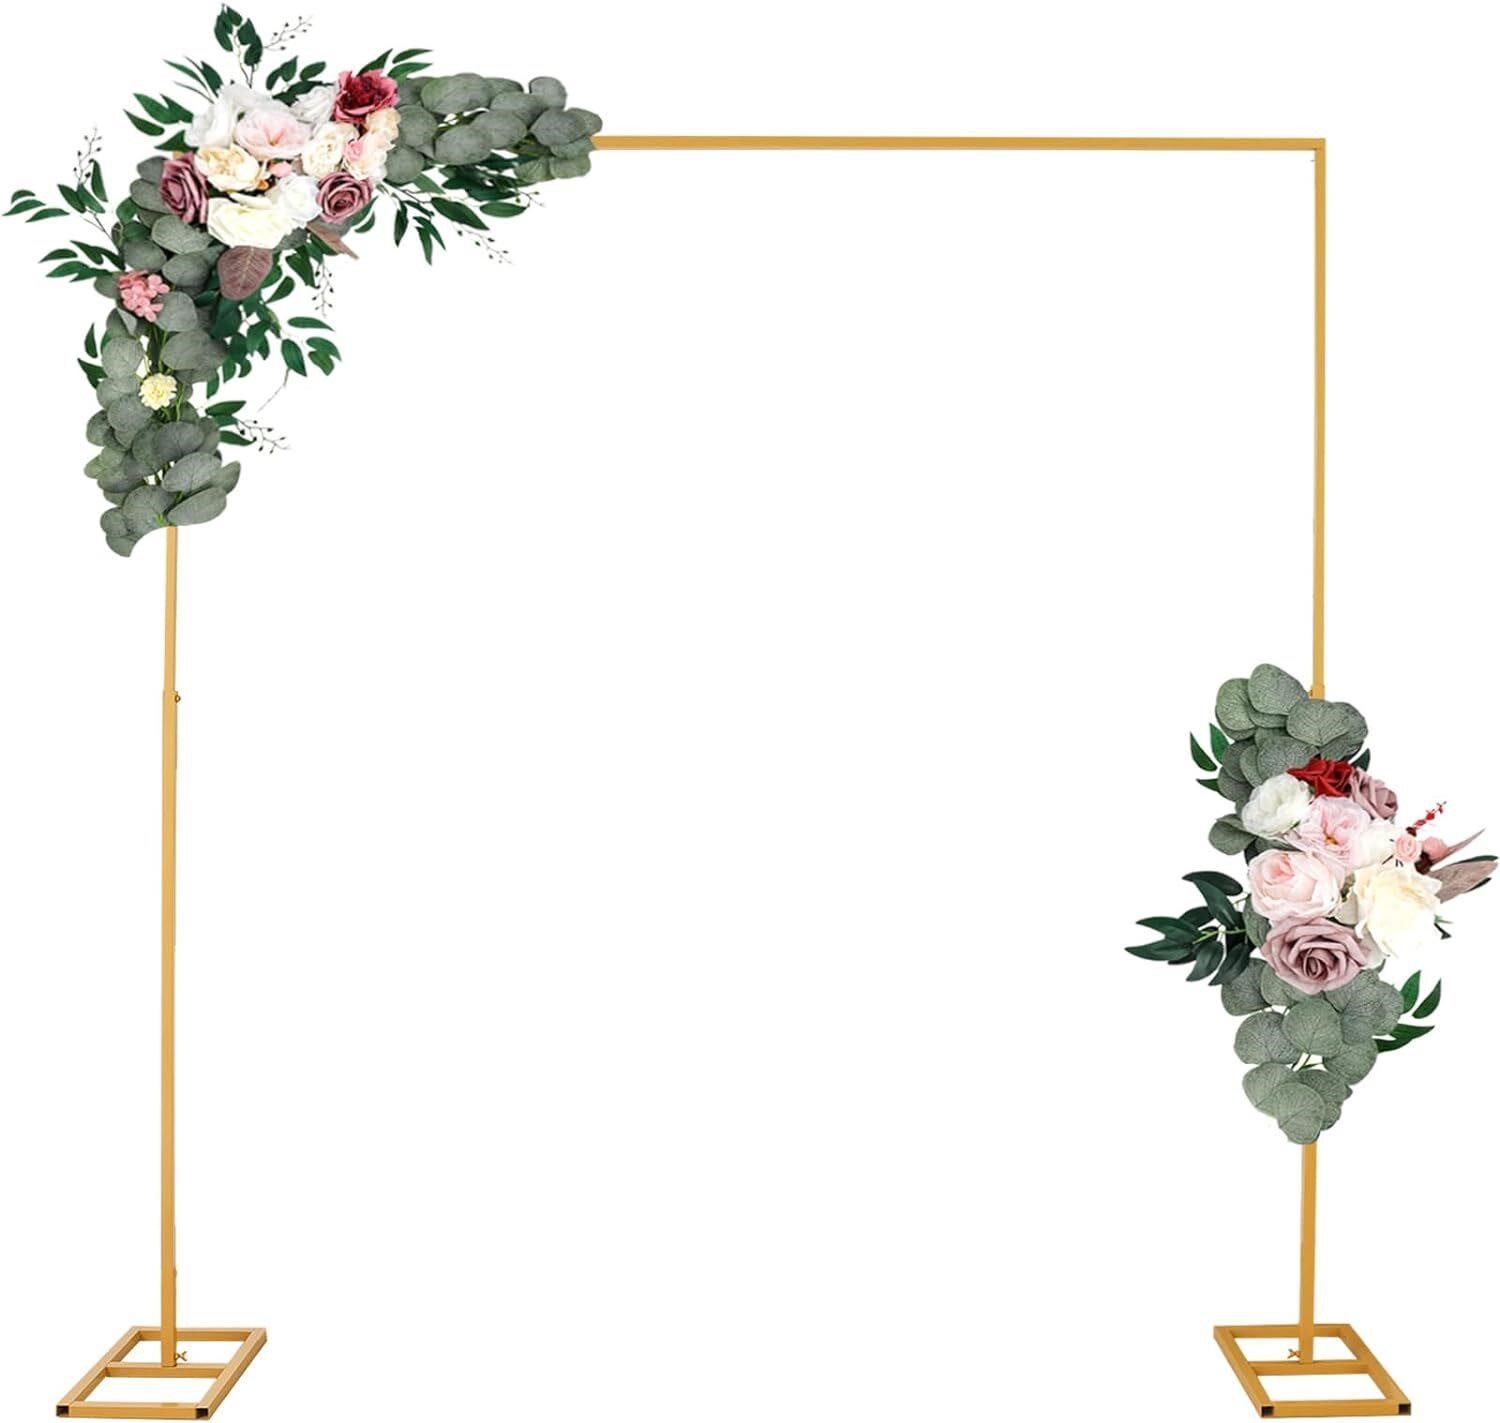 RUBFAC Backdrop Stand  10x10 FT  Gold Frame